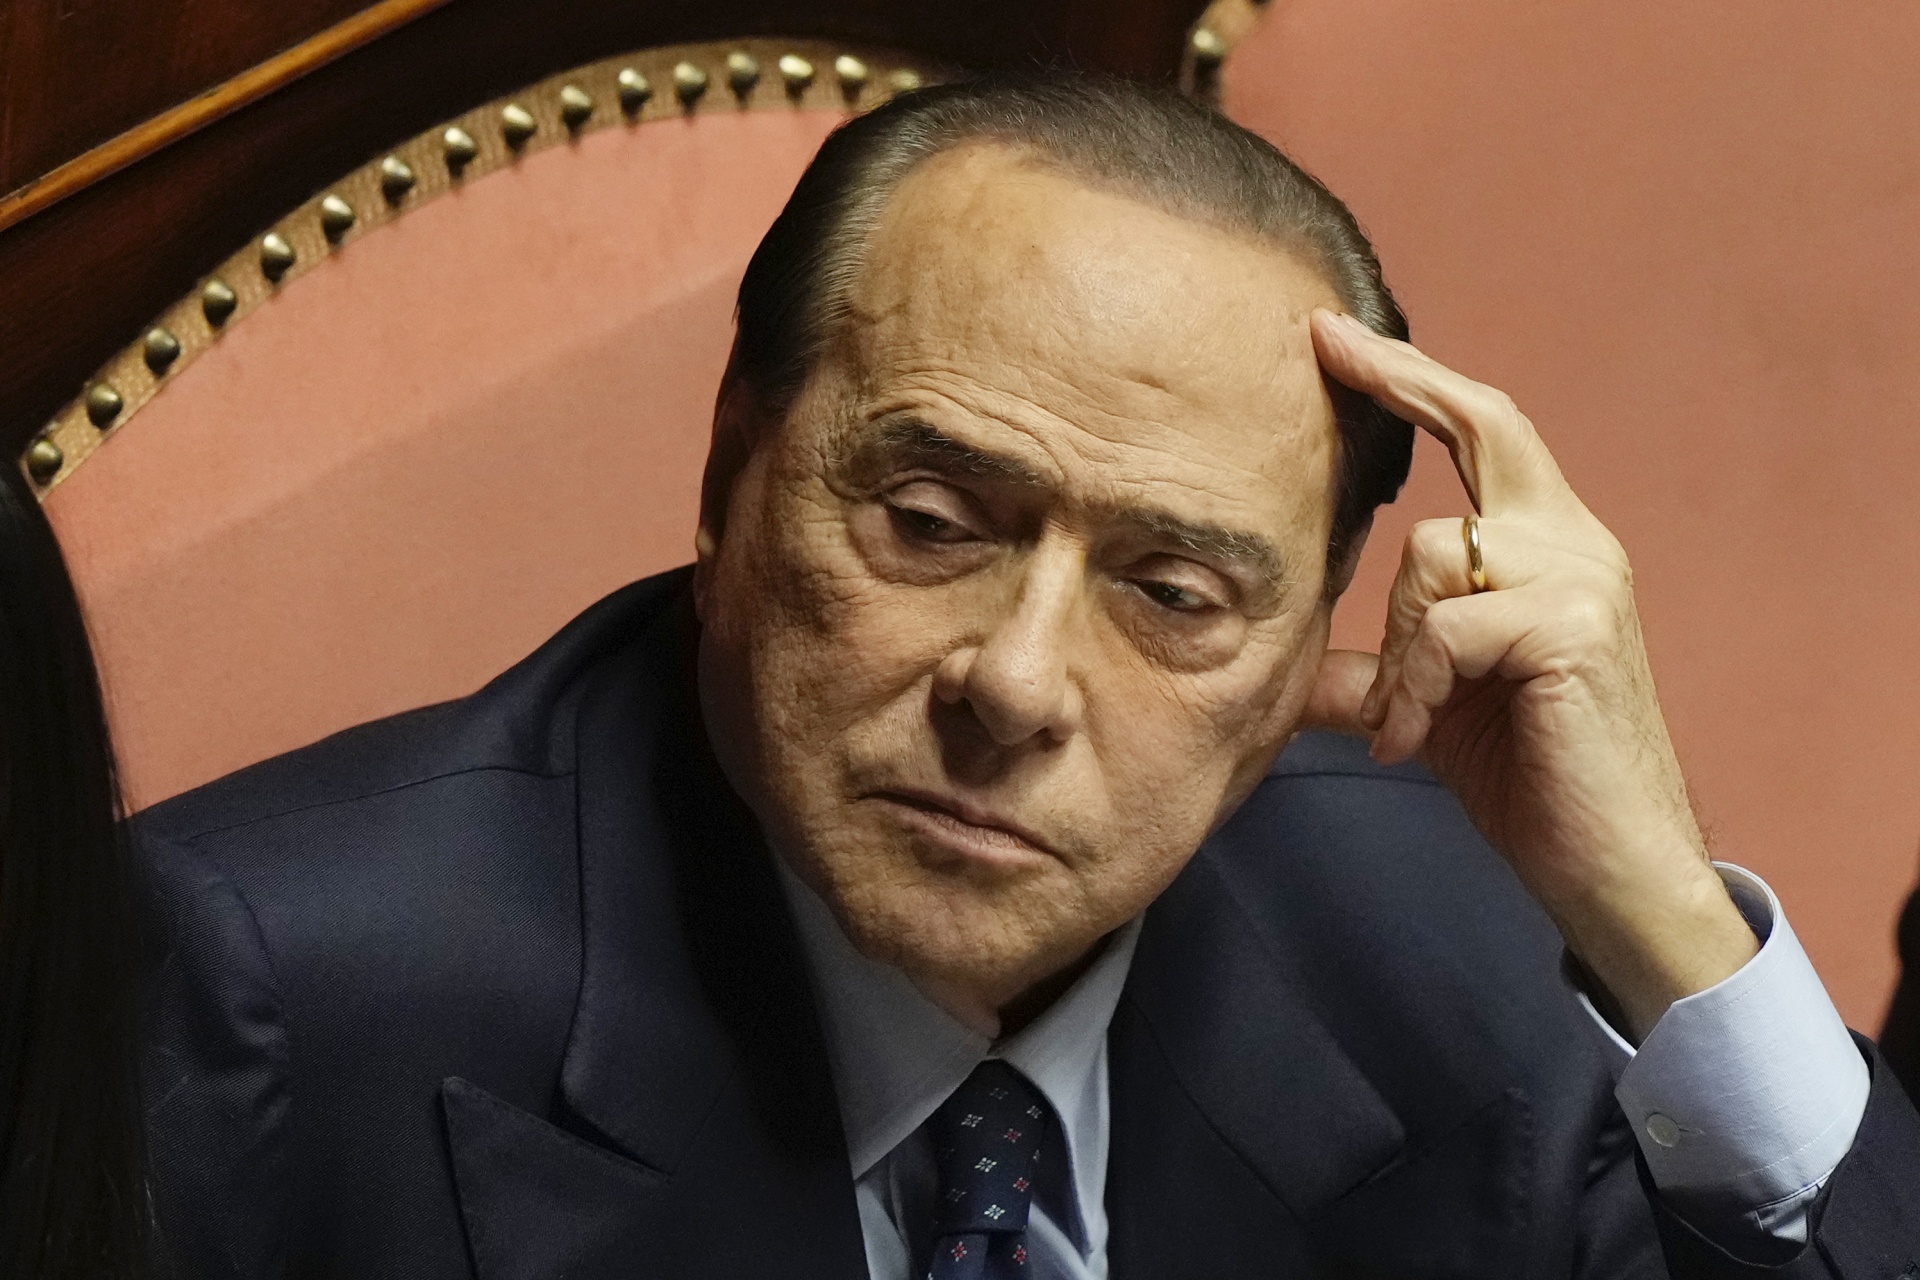 Silvio Berlusconi ended the boycott and isolation of the fascist tradition by mainstream parties, welcoming them into right-wing coalition governments from the 1990s onwards.